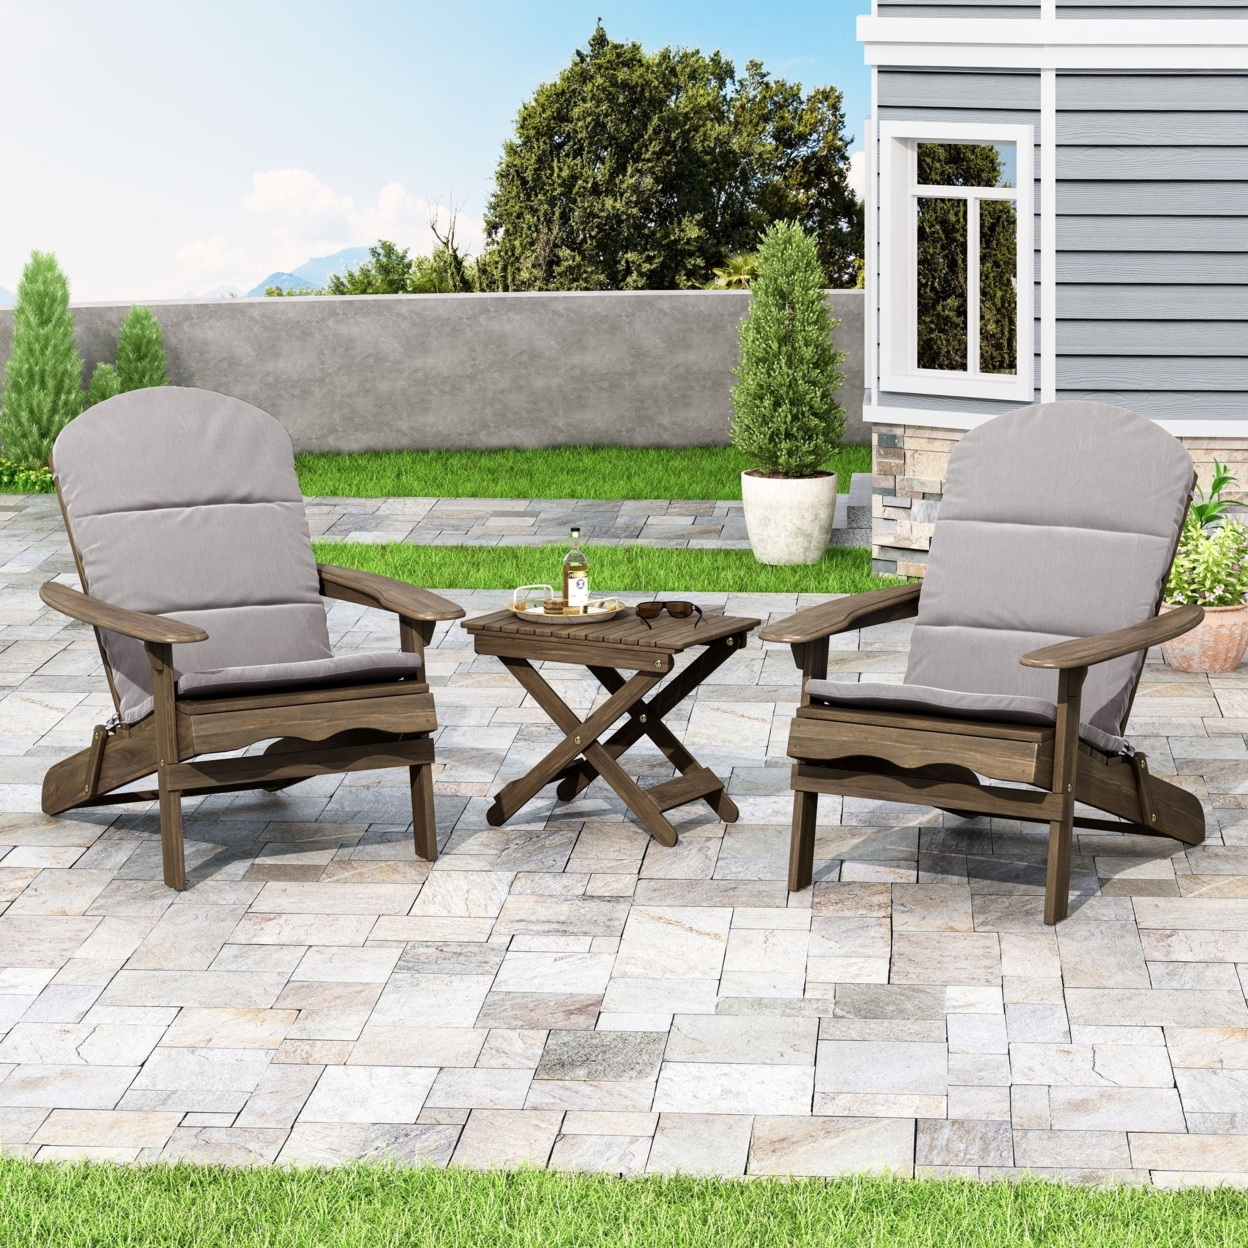 Reed Outdoor 2 Seater Acacia Wood Chat Set With Water Resistant Cushions - Gray/gray